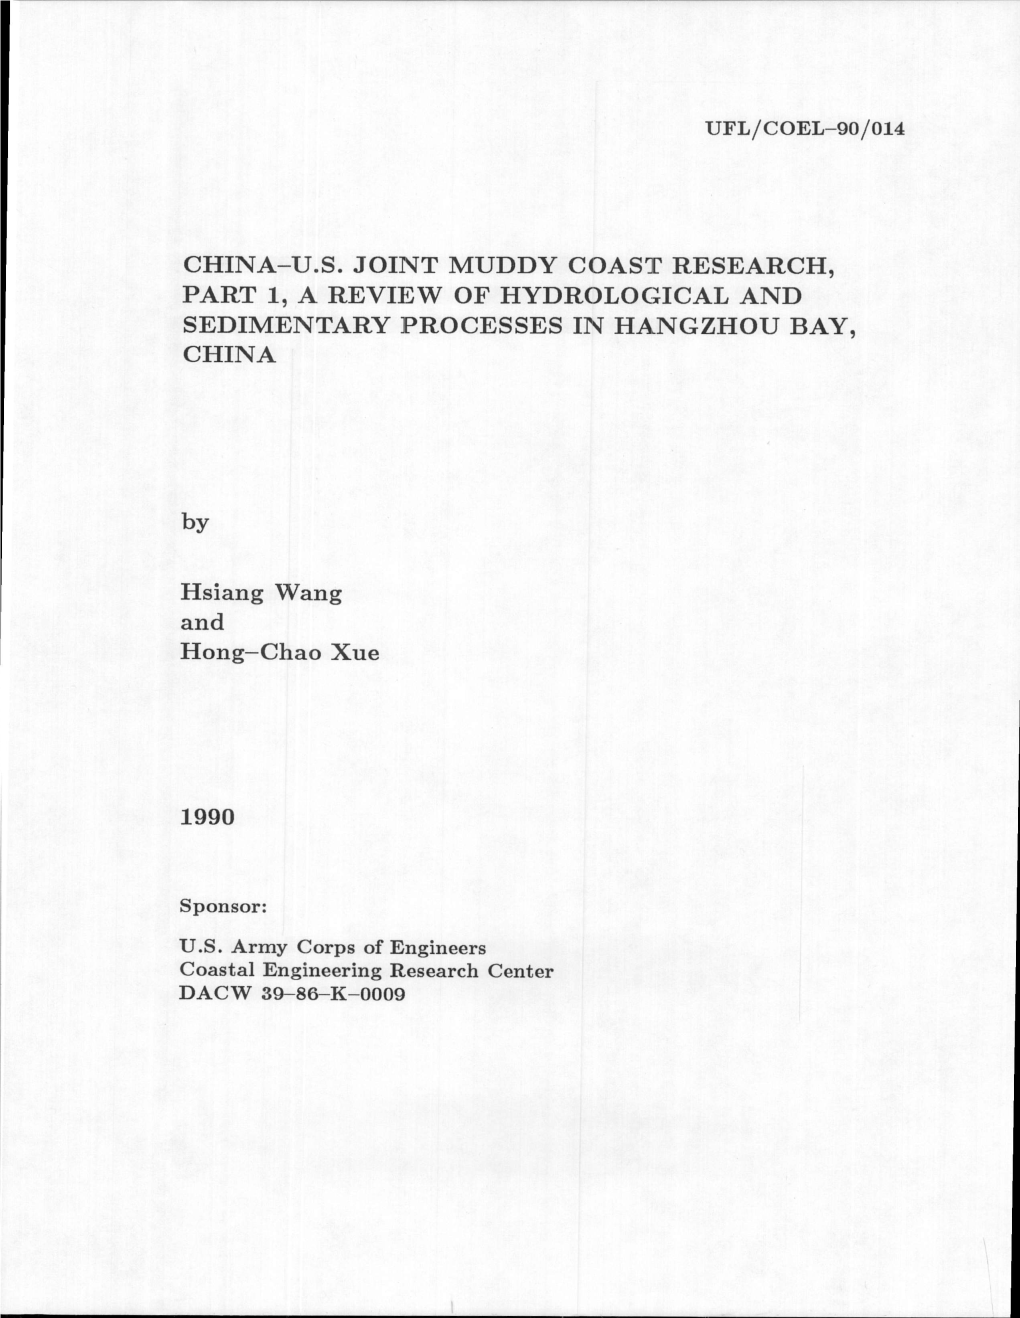 China-U.S. Joint Muddy Coast Research, Part 1, a Review of Hydrological and Sedimentary Processes in Hangzhou Bay, China